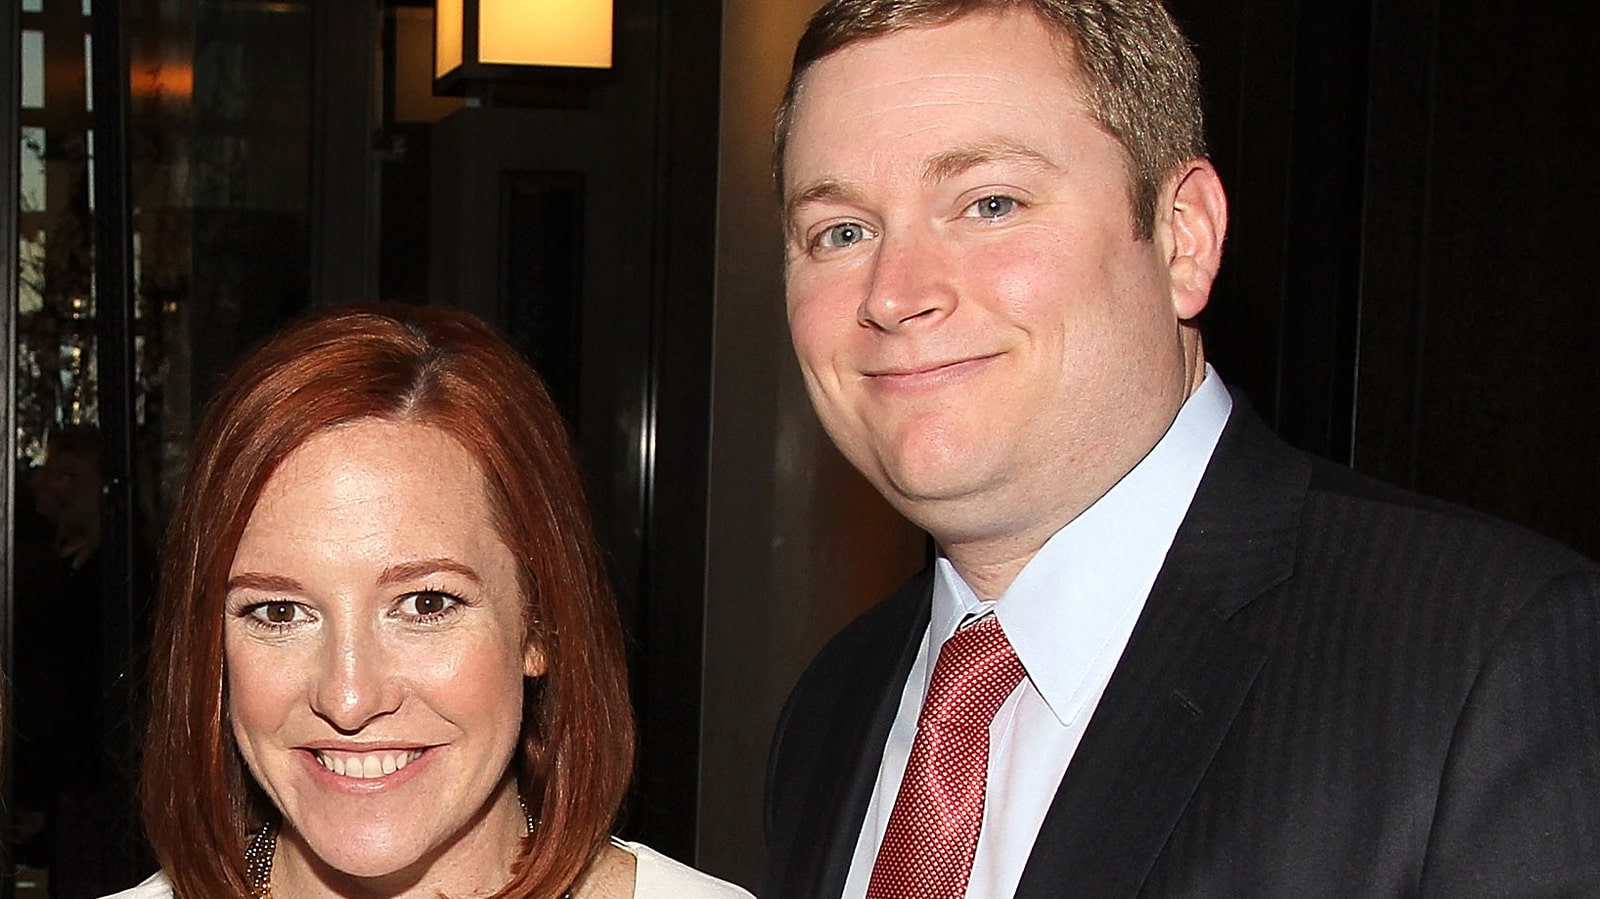 Gregory Mecher and his wife Jen Psaki in a frame.